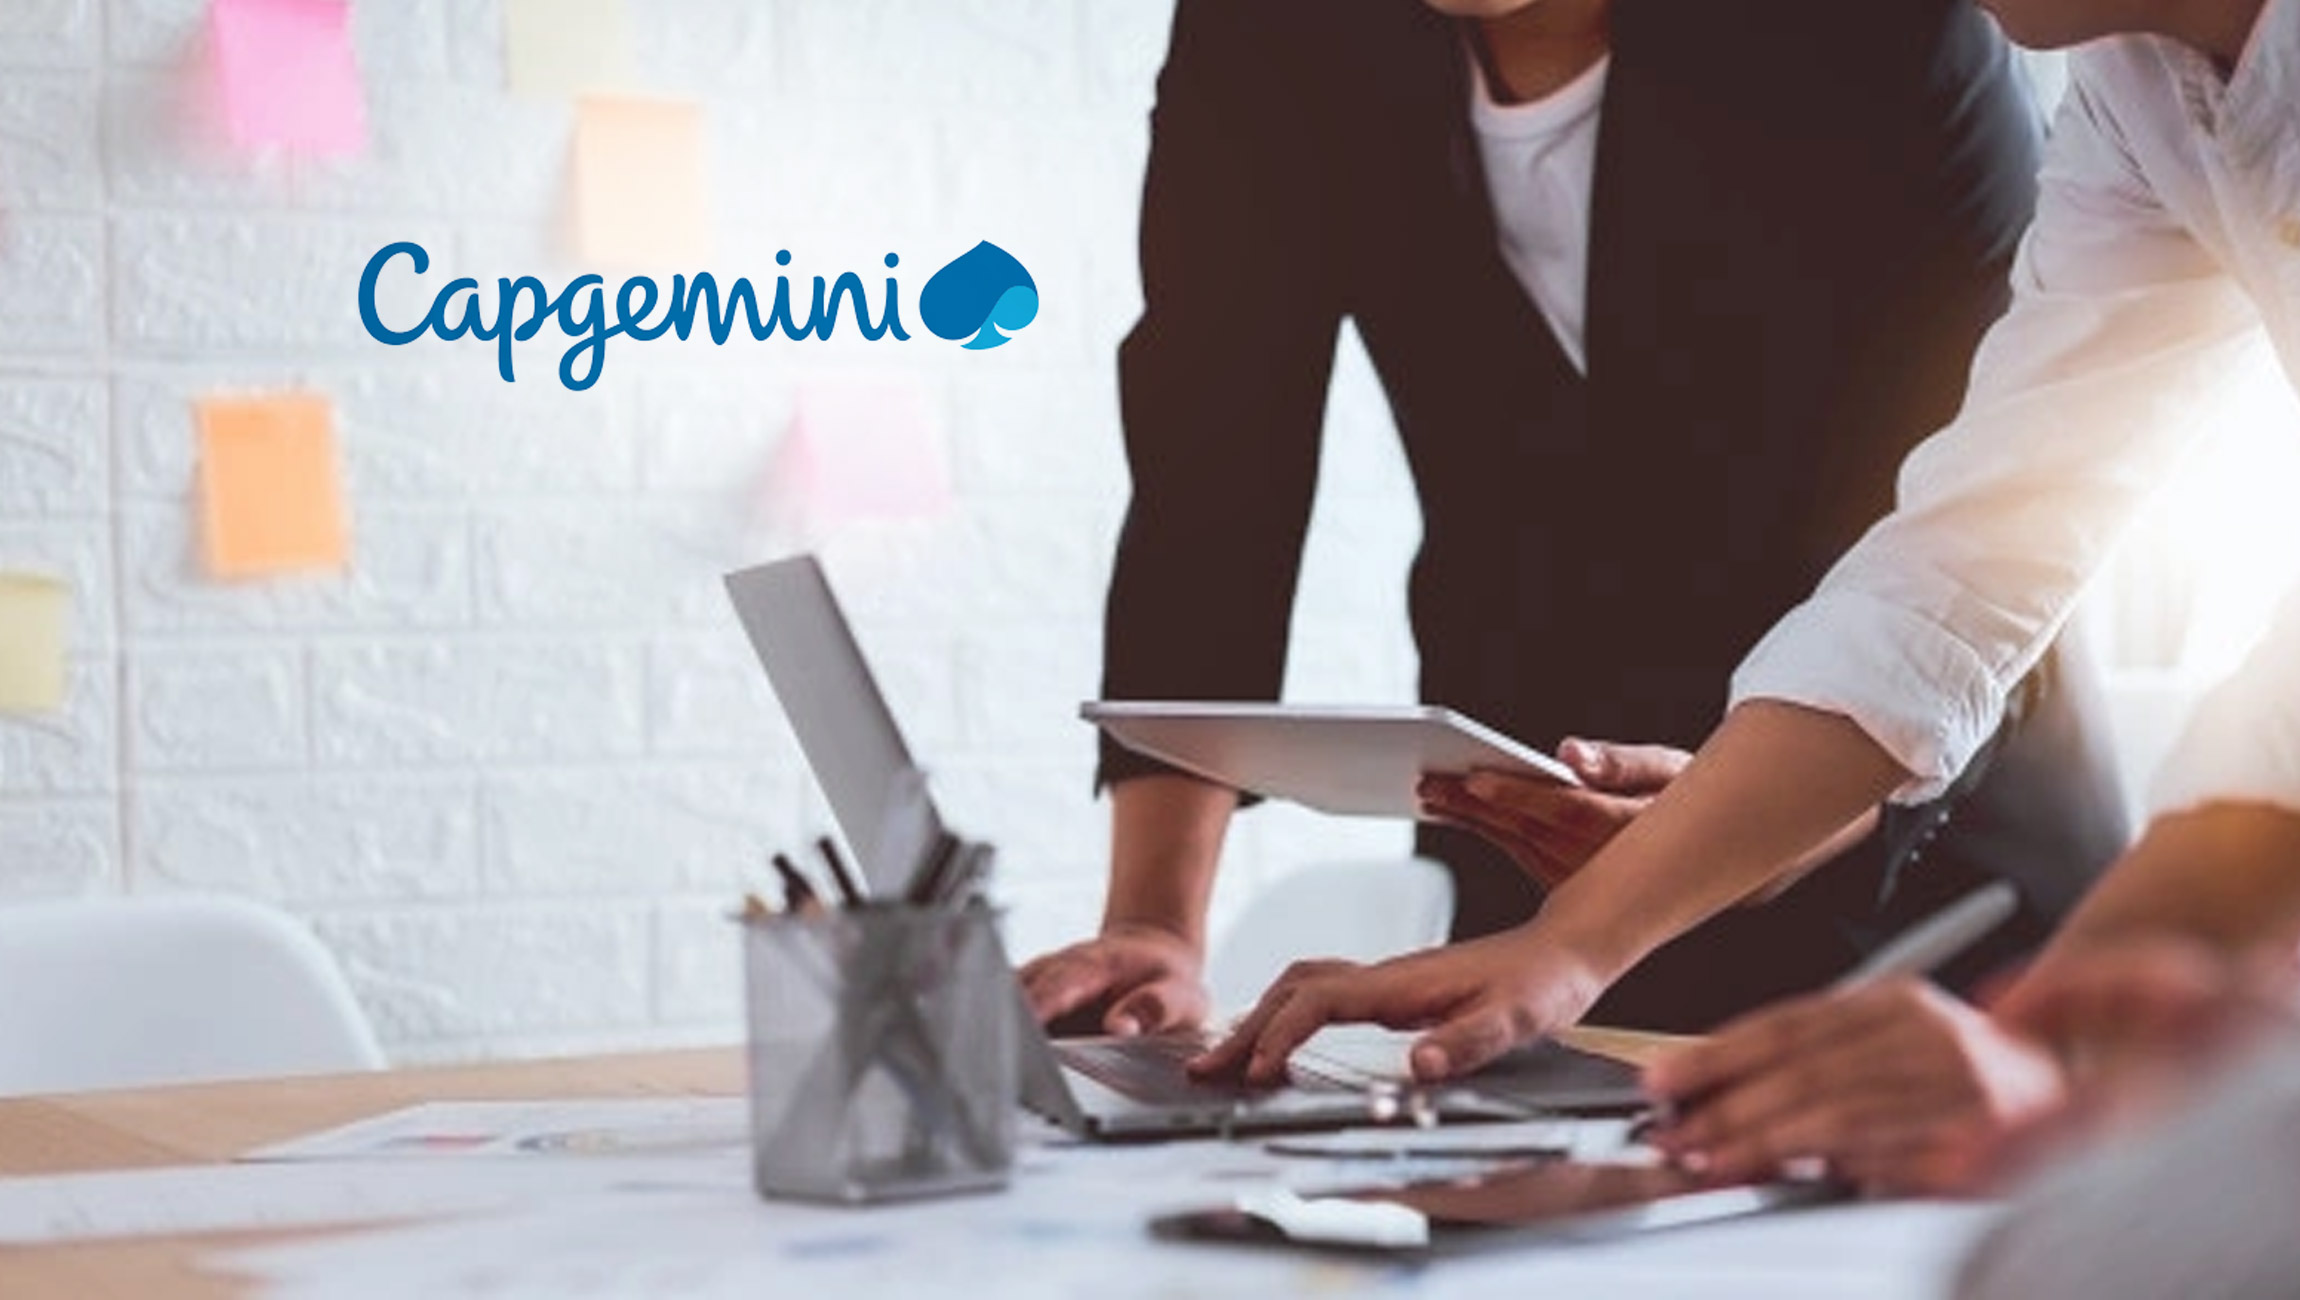 Capgemini-Press-Release--Sustainable-IT-leads-to-significant-benefits-but-is-currently-still-not-a-focus-for-most-organizations